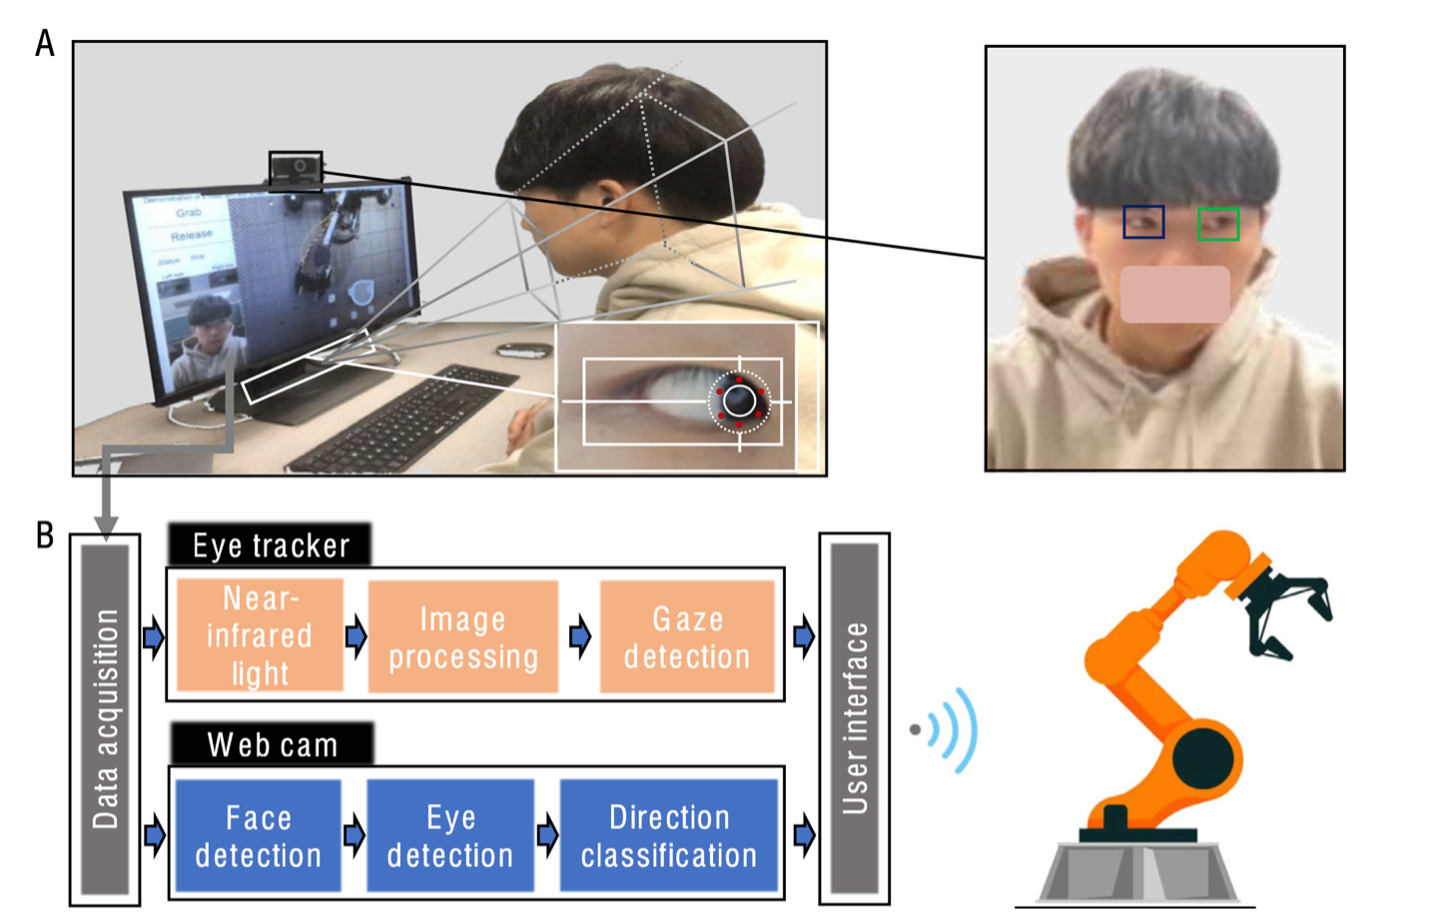 Person at computer screen. Lines show path to eyes. Chart: Data acq.>eye tracker: near-infrared light to image processing to gaze detection. Data>webcam: detection of face, eye, direction classification. To User Interface. Wi-Fi icon to robotic arm. 